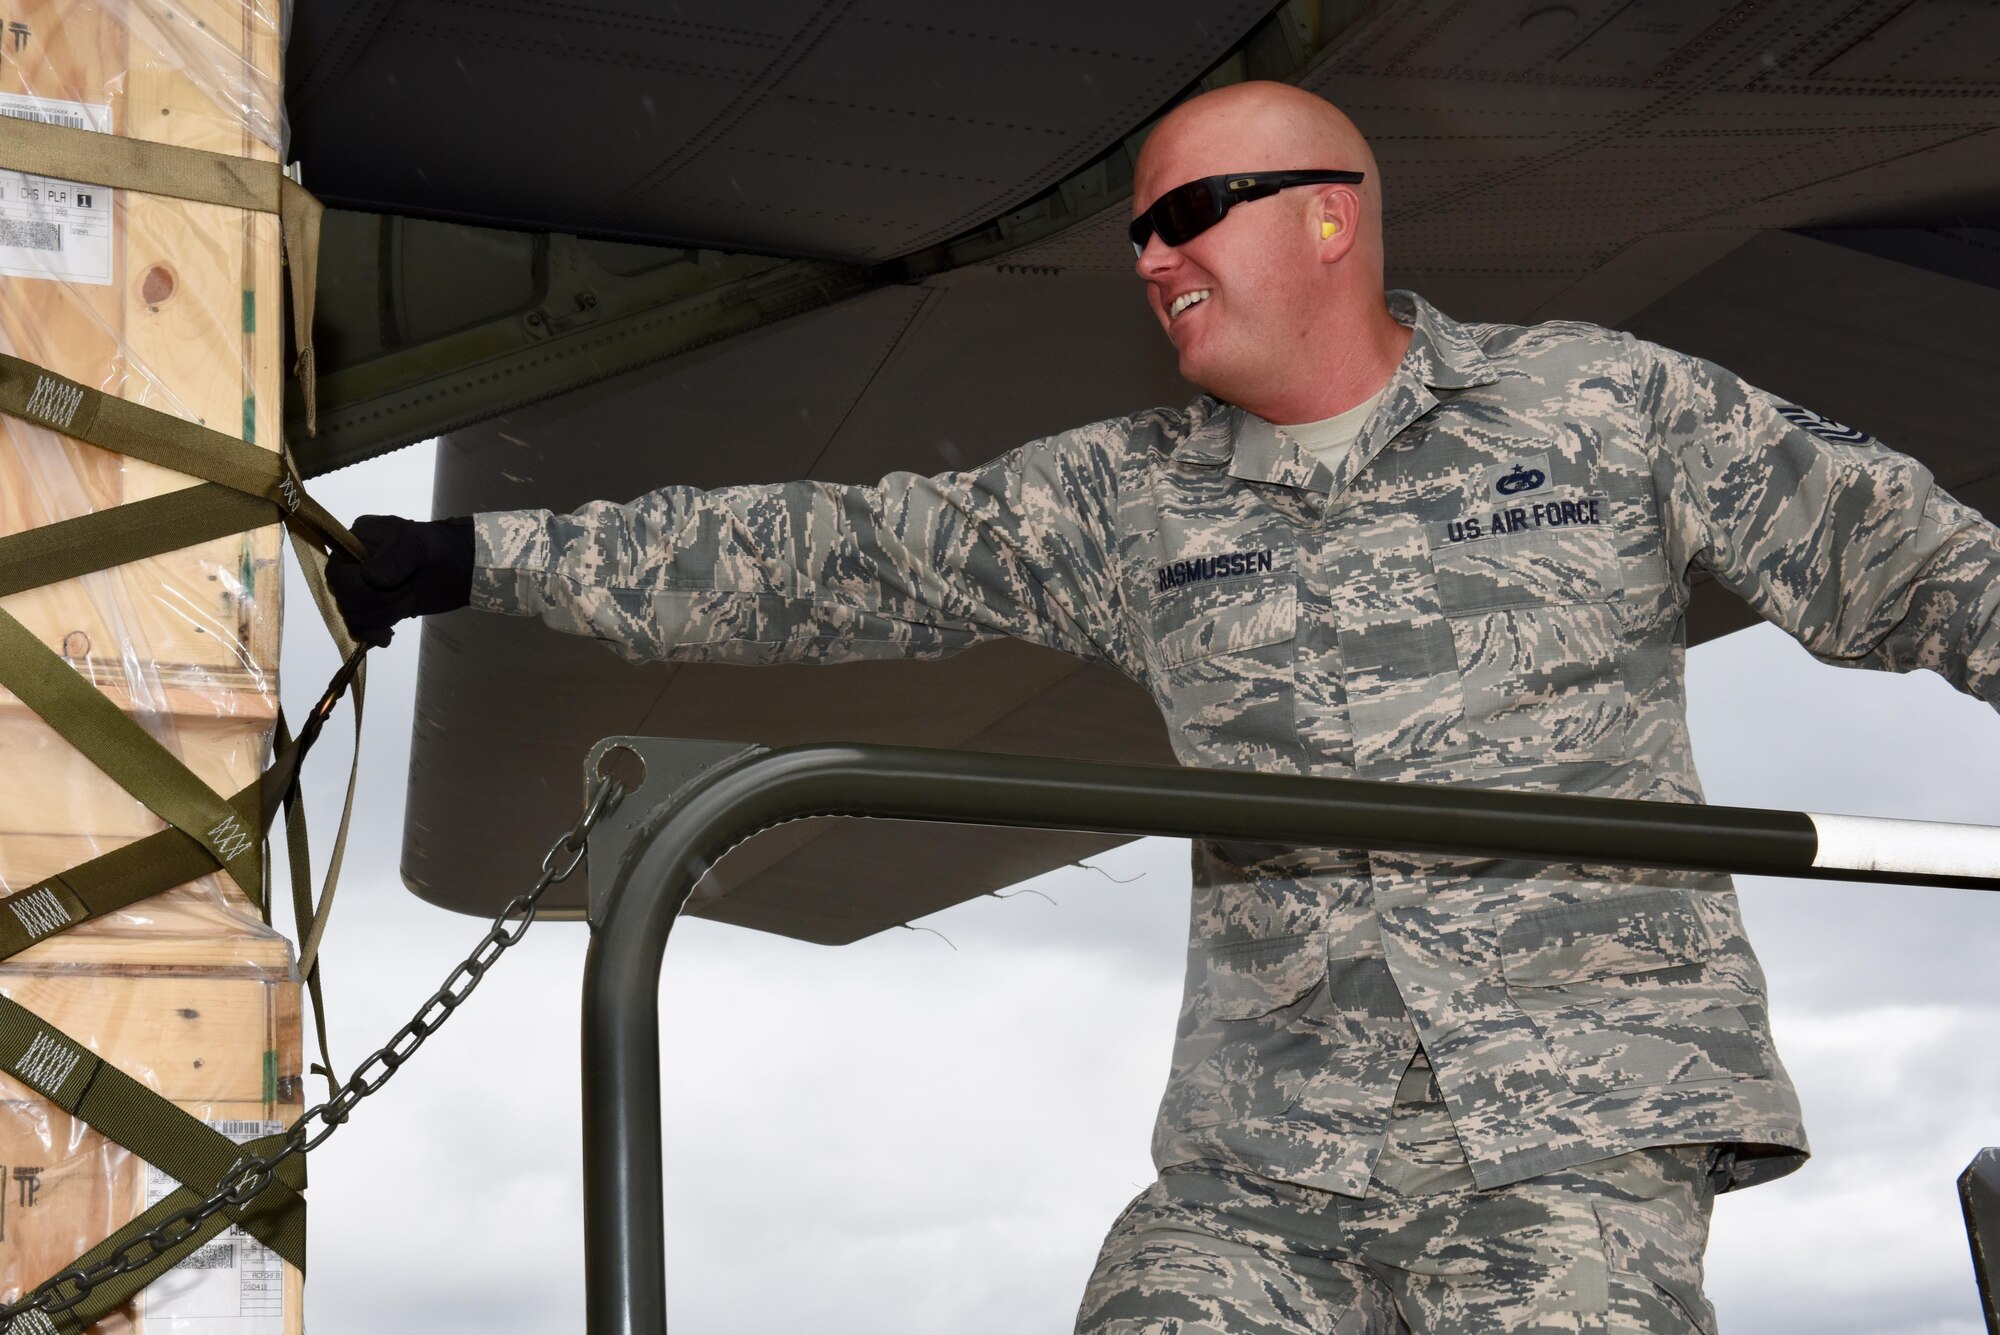 Tech. Sgt. Jonathan Resmussen, 612th Air Base Squadron, Air Transportation Operations Center section chief, pulls a pallet off the C-130J from the 317th Airlift Wing Oct. 18, 2017, at Soto Cano Air Base, Honduras.  The pallets were delivered as part of a routine channel mission delivering sustainment and equipment to Airmen stationed in the Central American country. The Airmen from the 317th Airlift Wing at Dyess Air Force, Texas, routinely support the Honduras mission, a tasking from the 618th Air Operations Center.  (Air Force photo by Master Sgt. Kristine Dreyer)